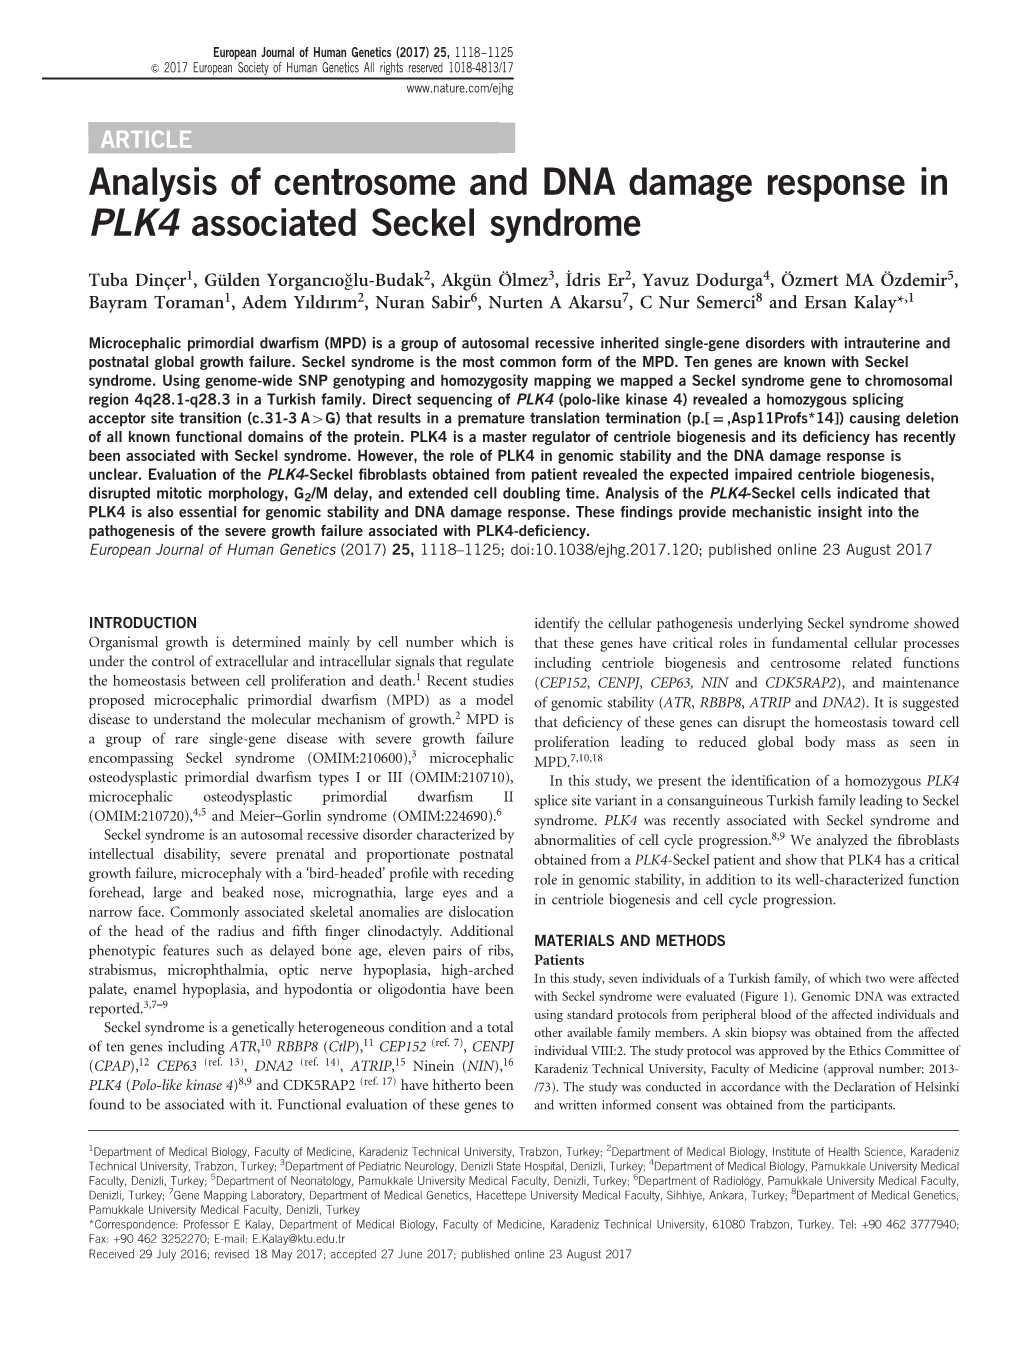 Analysis of Centrosome and DNA Damage Response in PLK4 Associated Seckel Syndrome